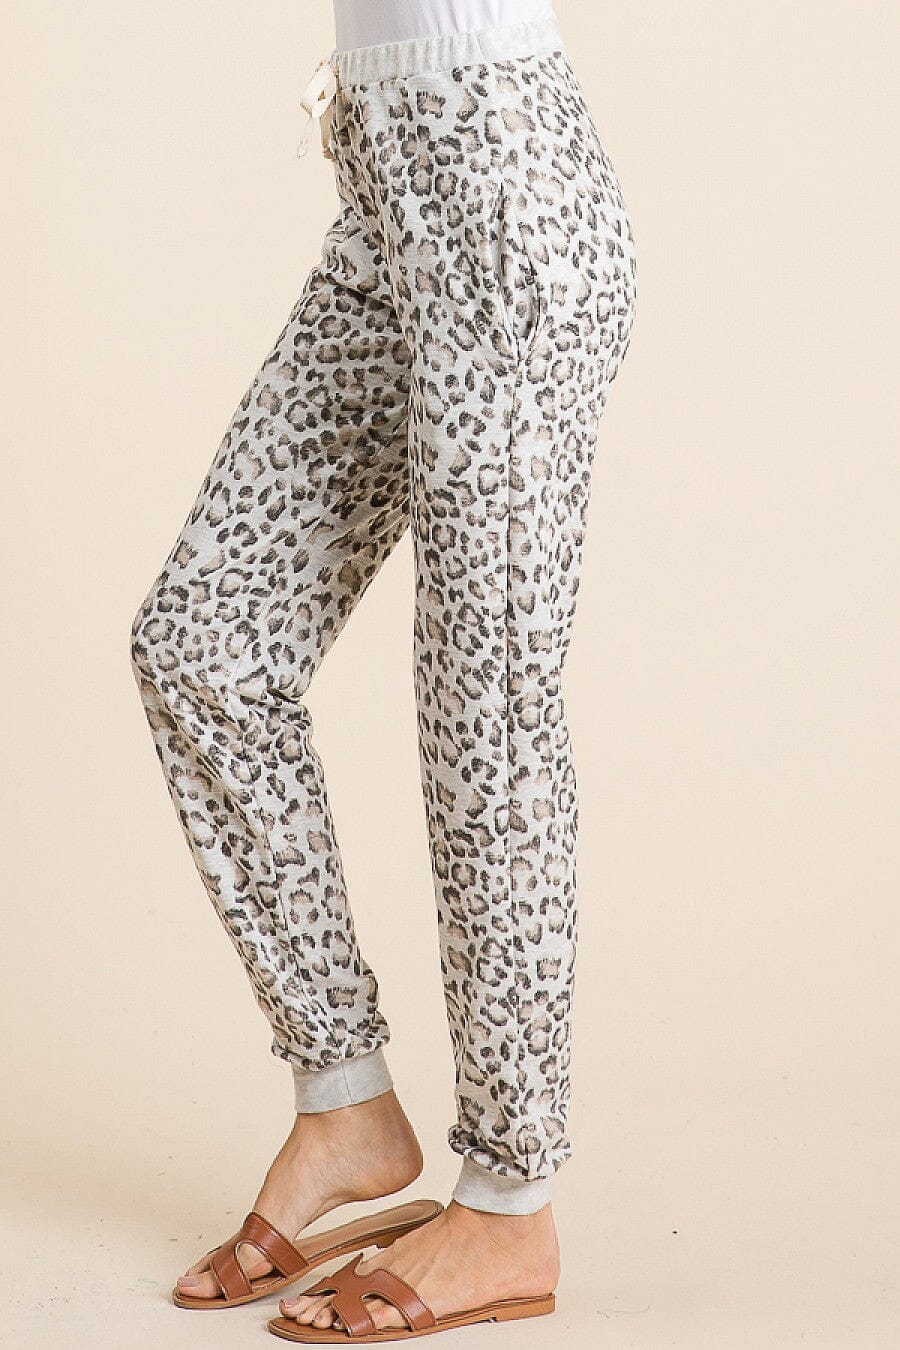 Leopard French Terry Joggers